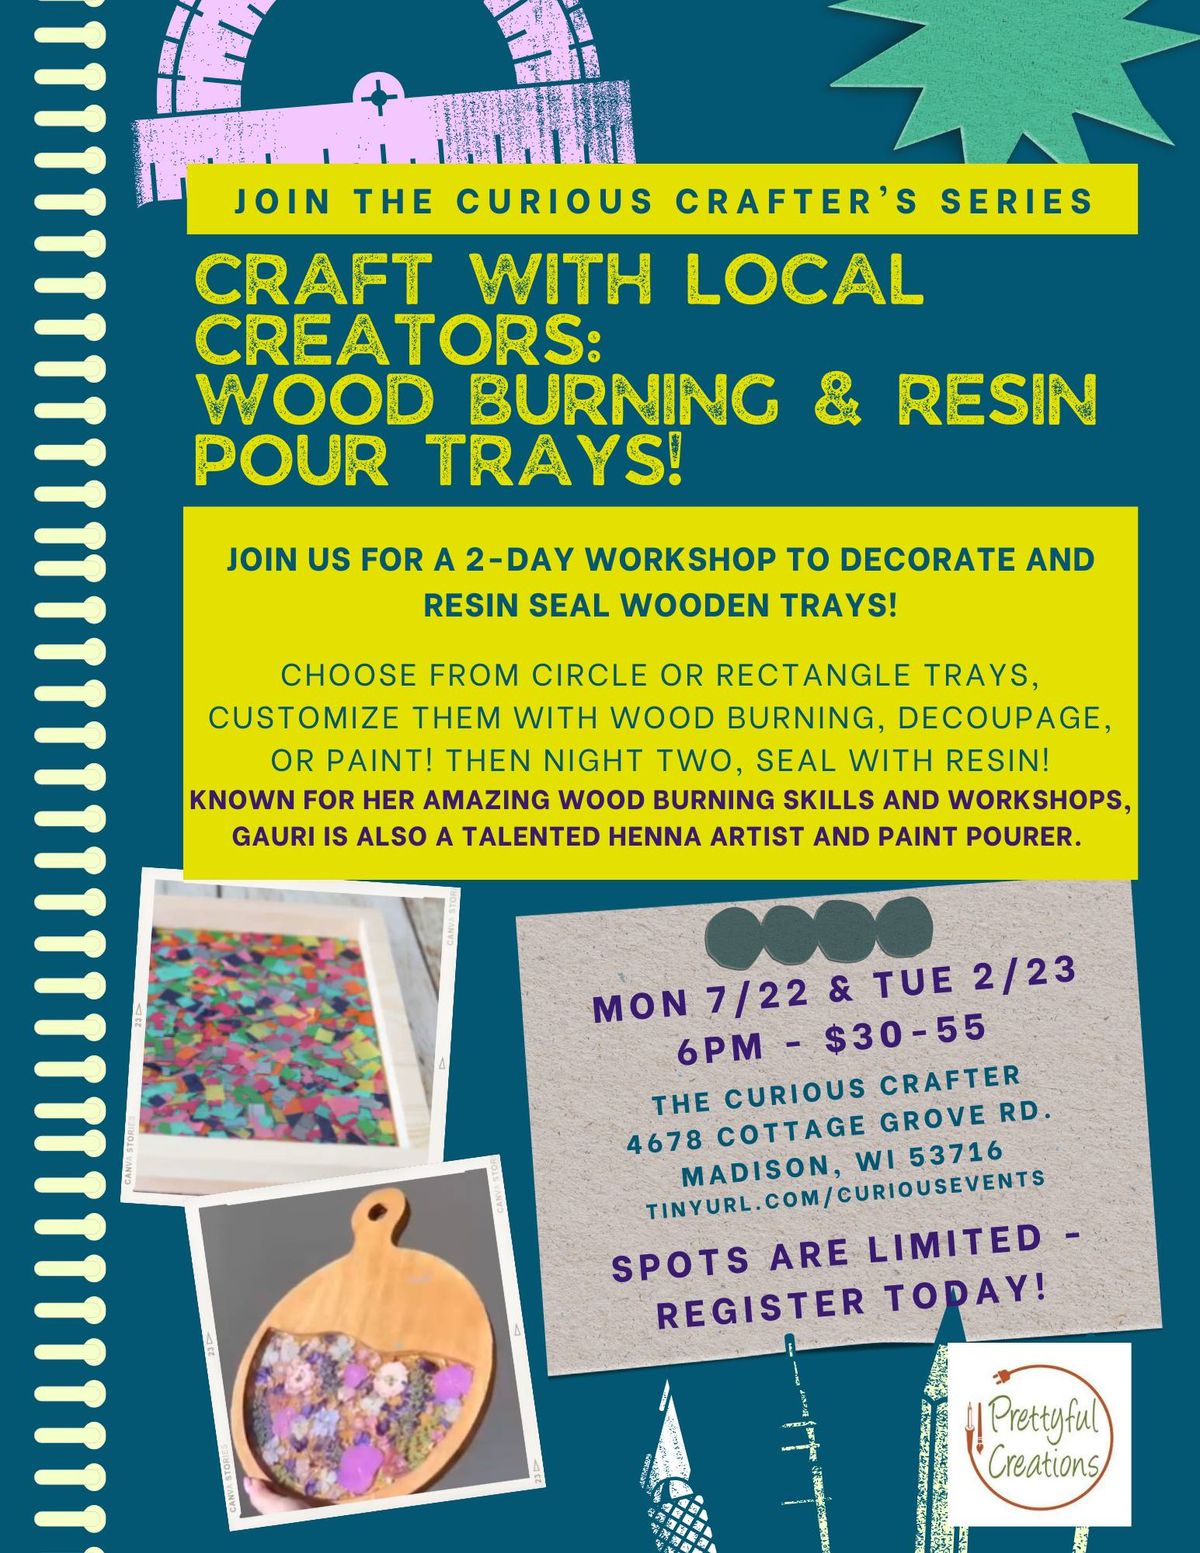 Wood Burning and Resin Poured Wooden Tray Workshop!